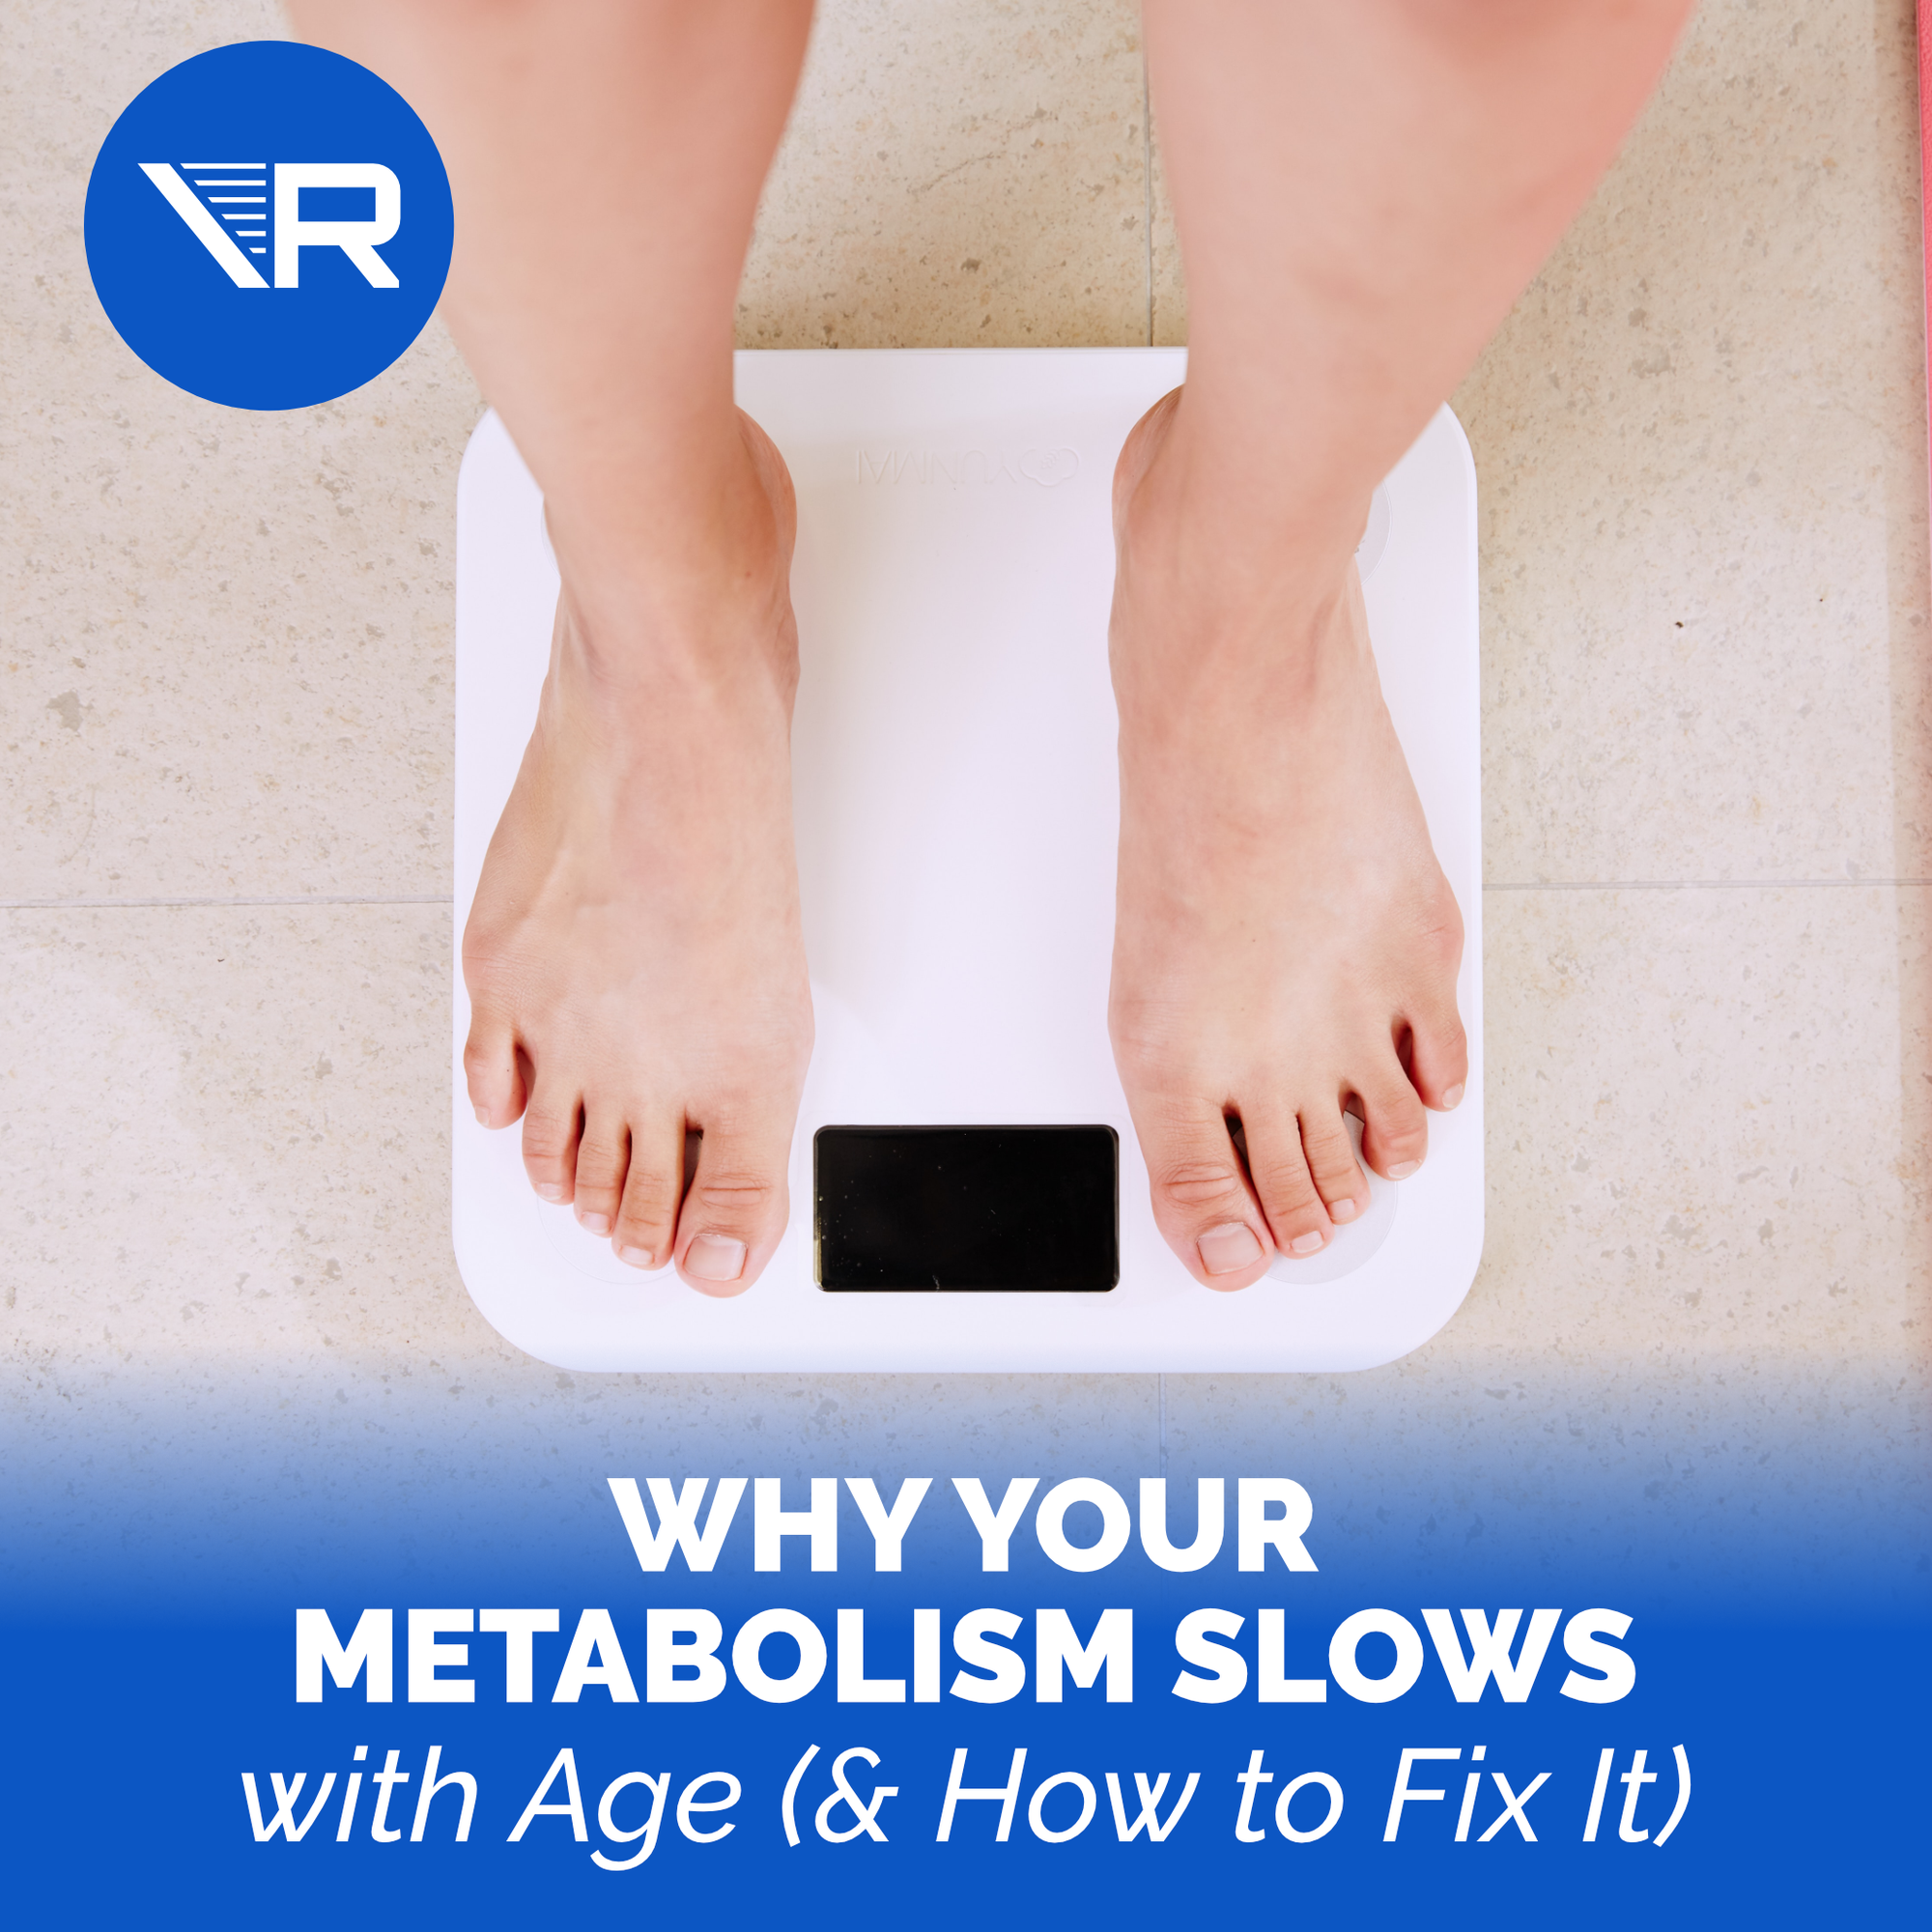 Why your metabolism slows with age